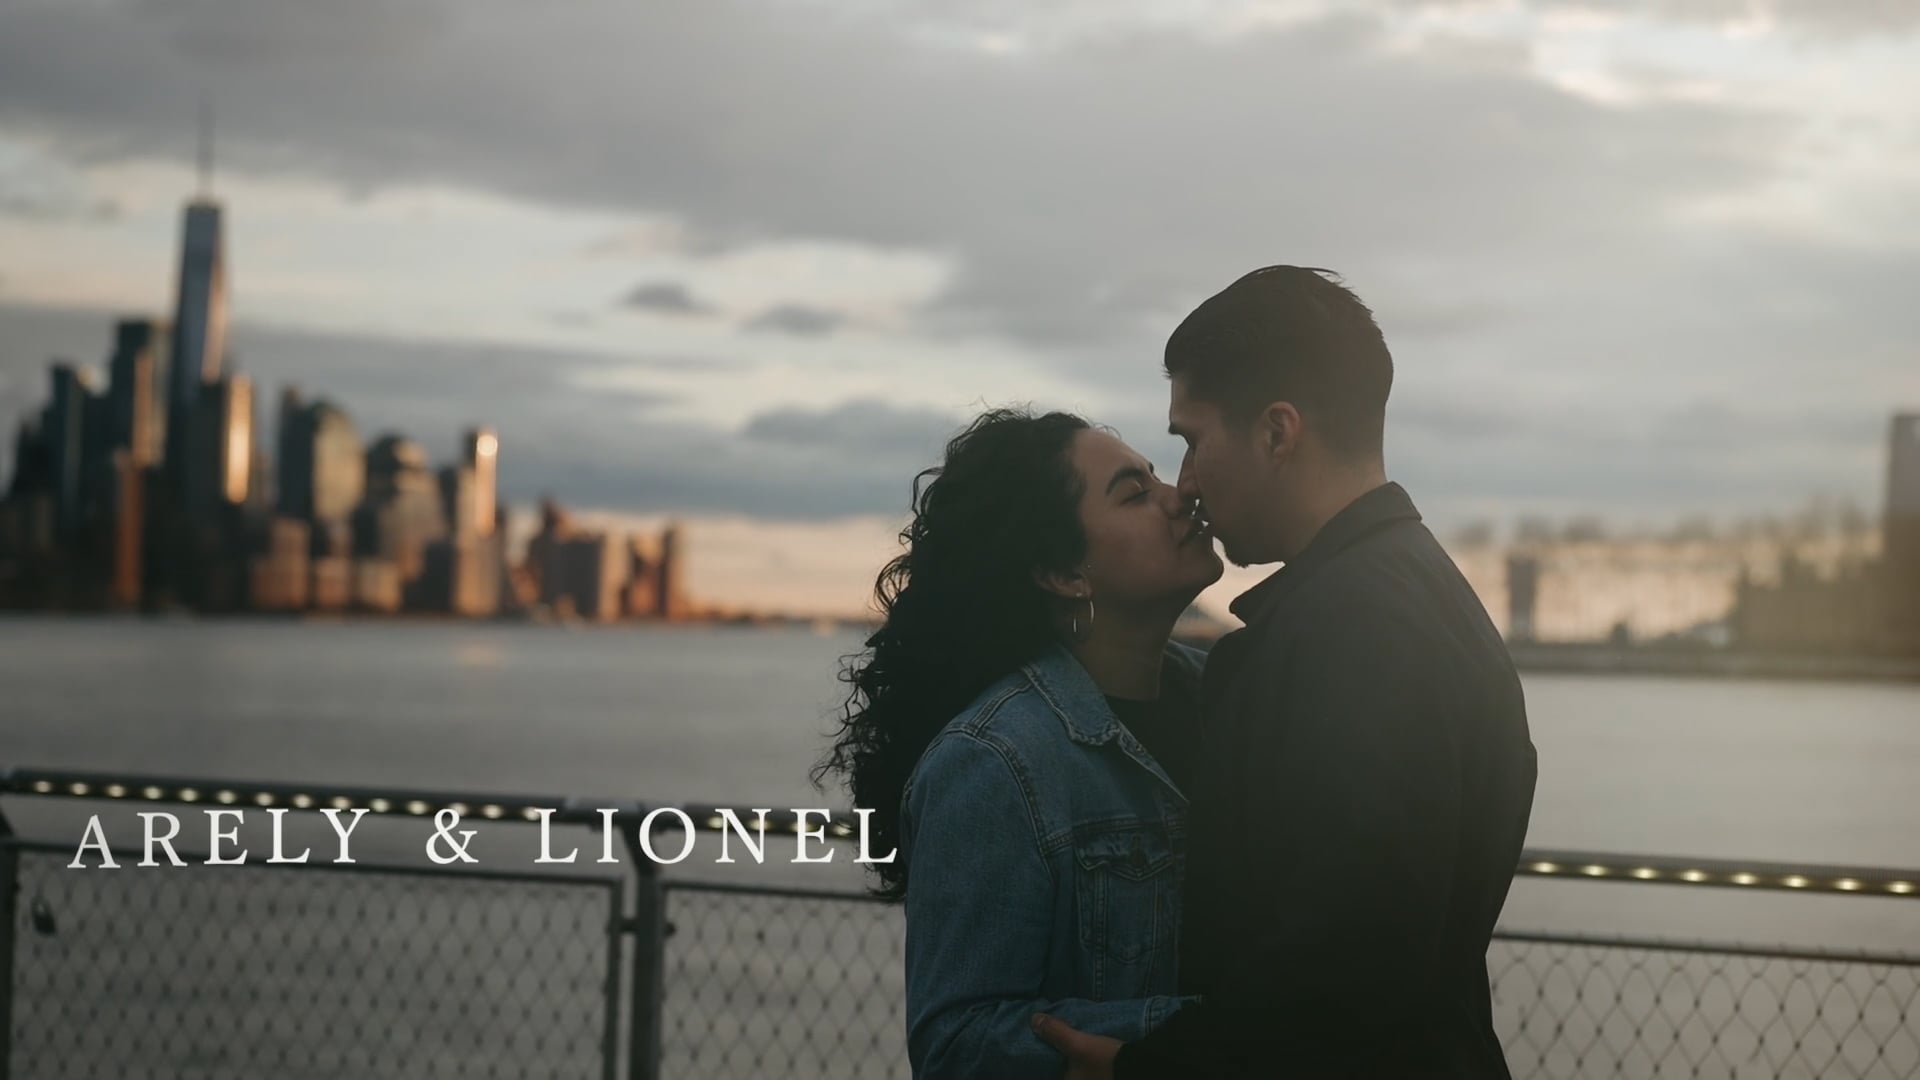 ARELY & LIONEL'S SAVE THE DATE